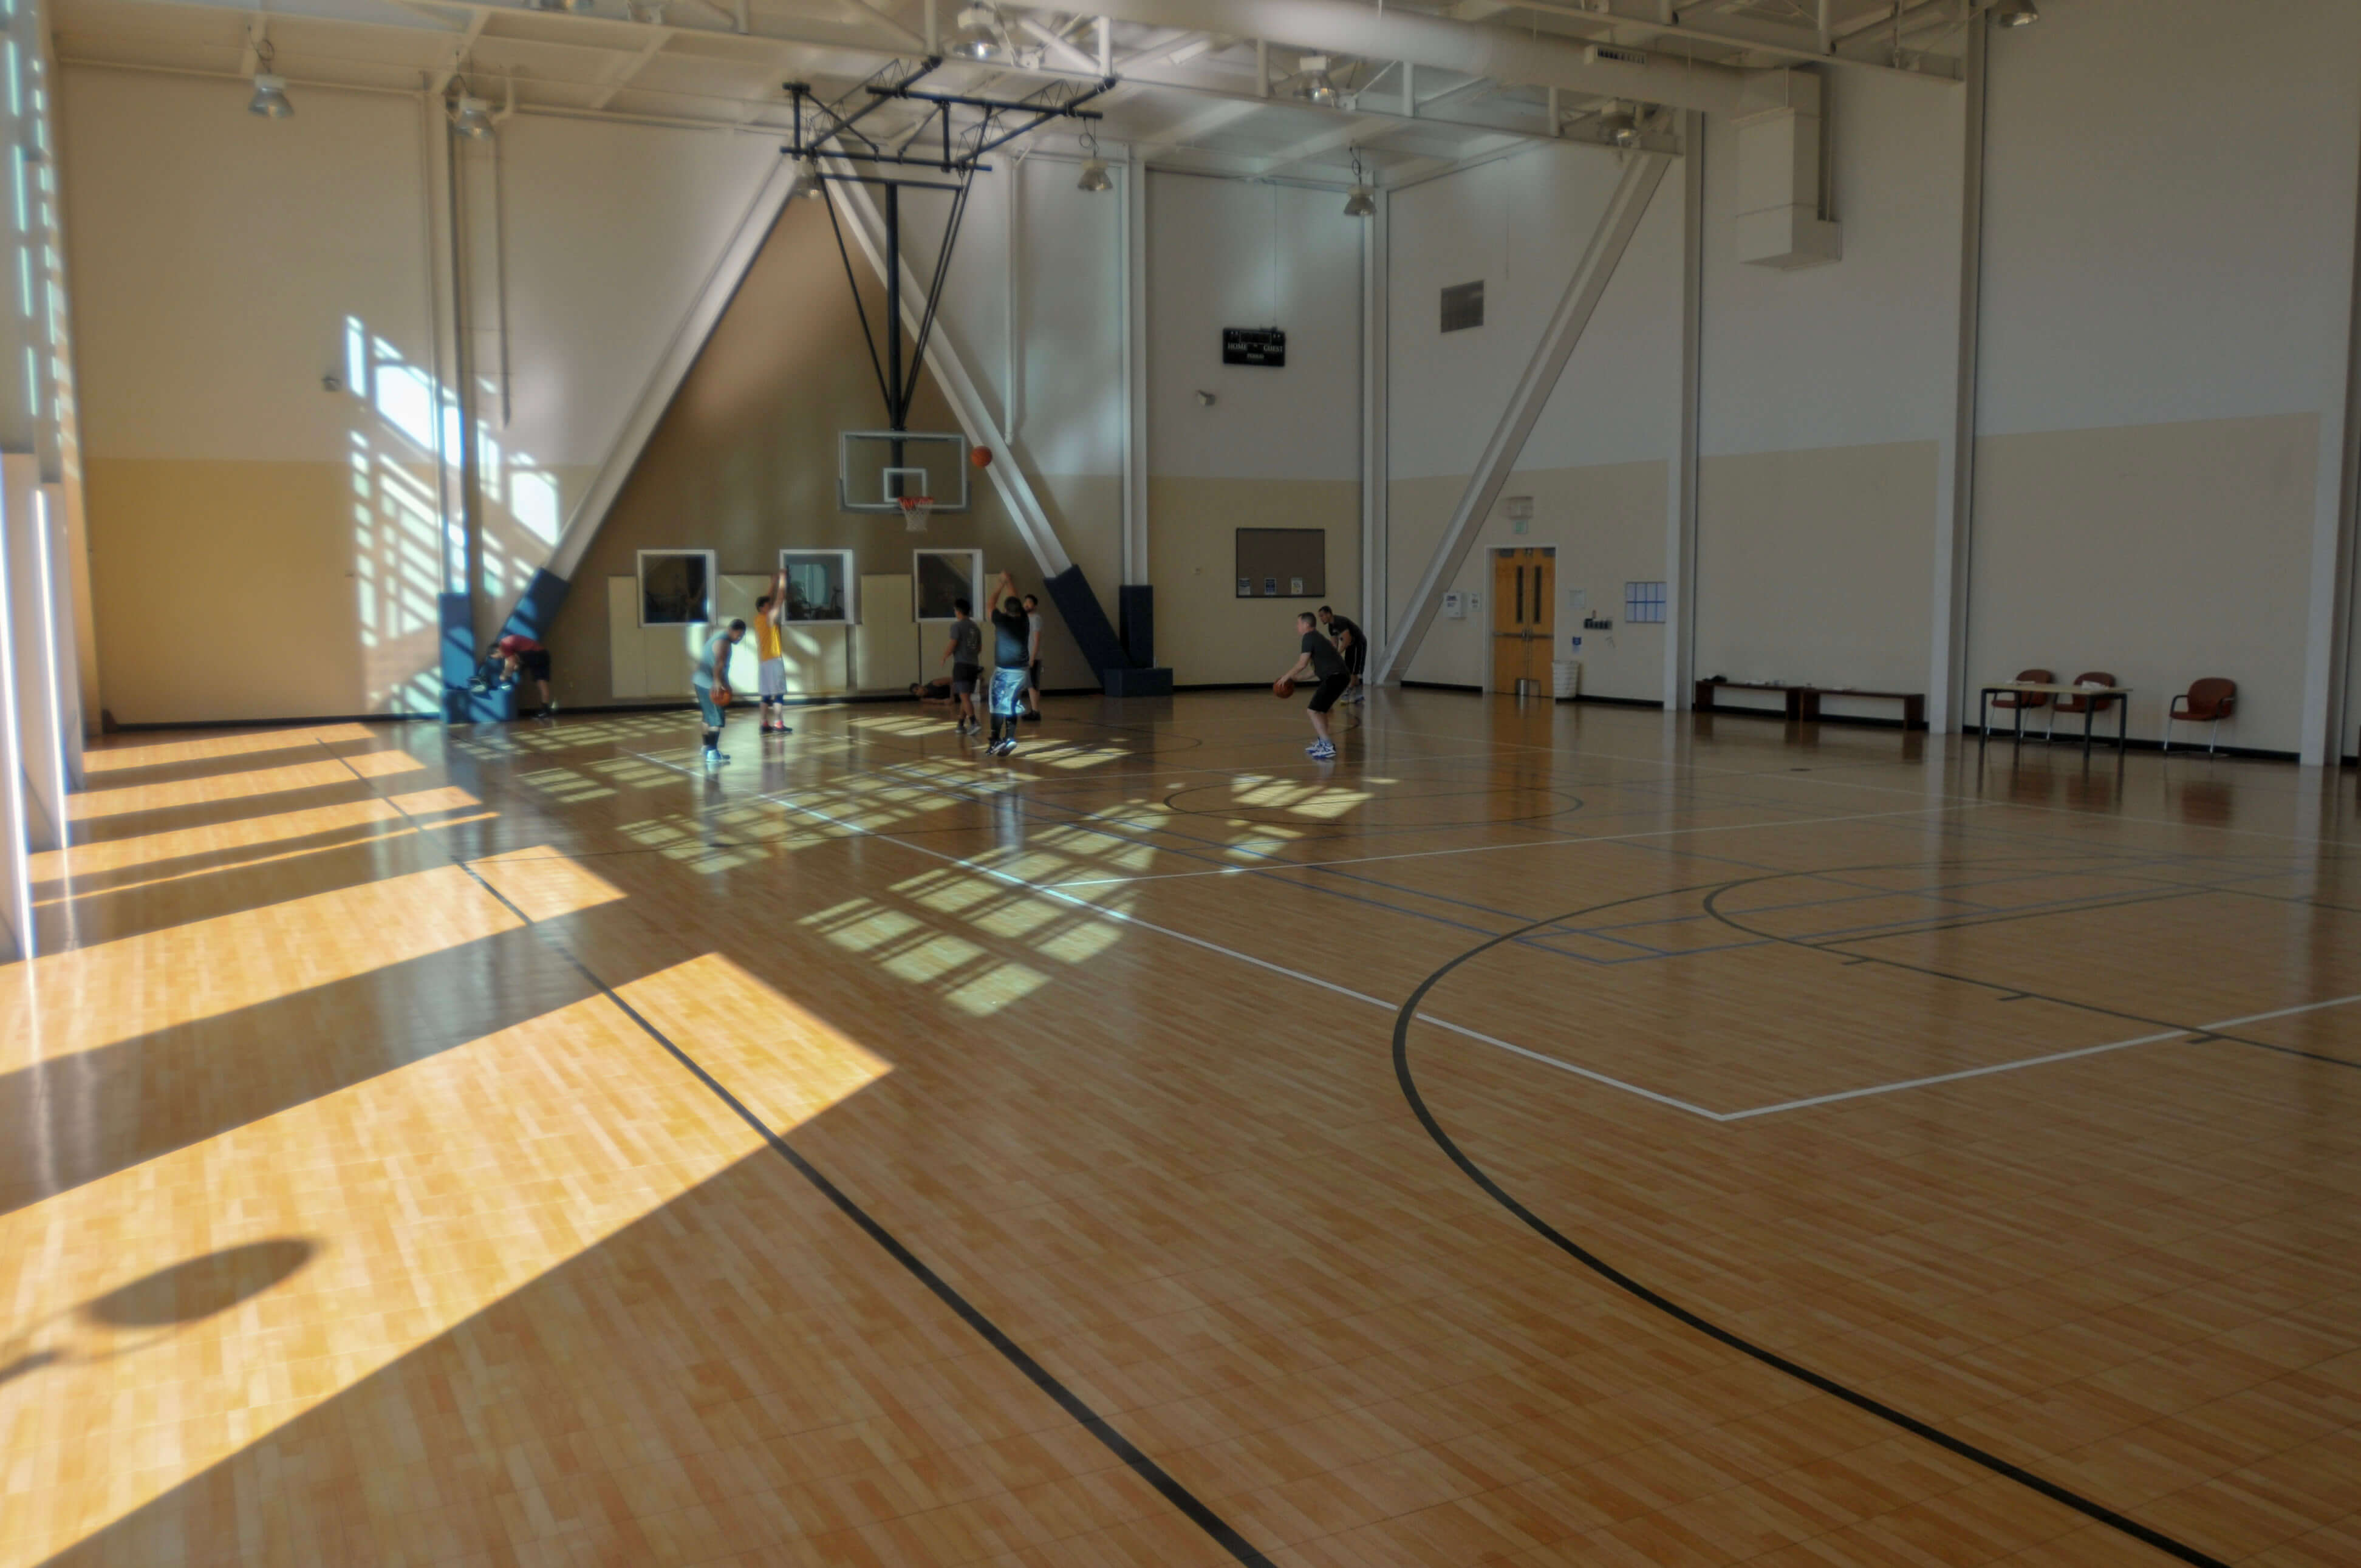 These Google employees scored with this indoor Sport Court!